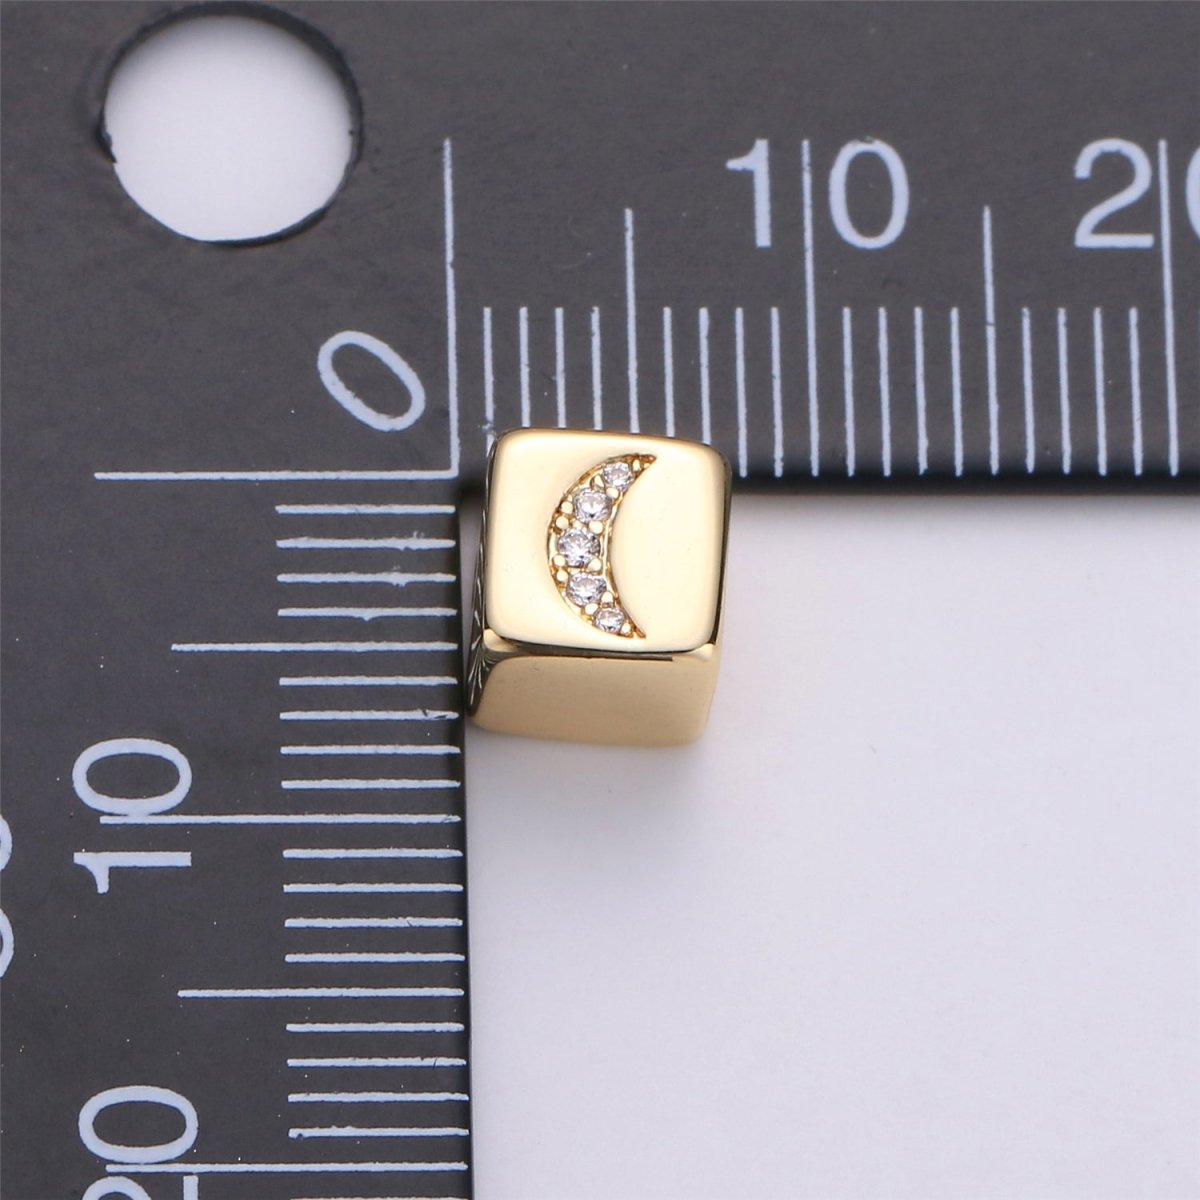 Small Hole Square Beads Gold Celestial Beads Moon Square Beads Planet Earth Universe Inspired for Bracelet Bead B-166 - DLUXCA